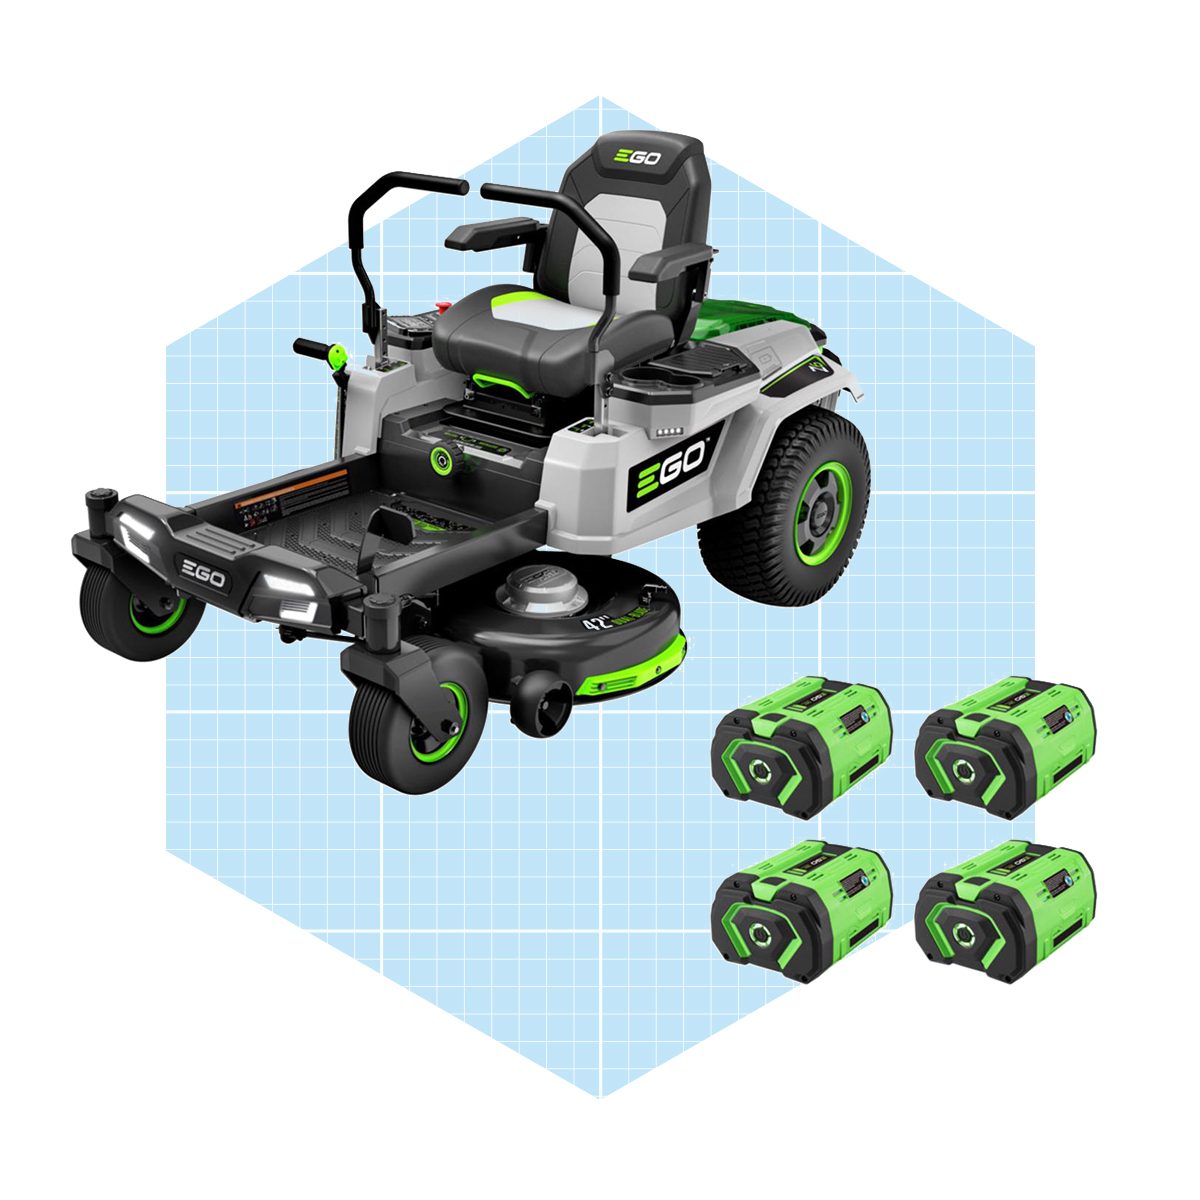 Ego Power+ Z6 42 In Lithium Ion Electric Riding Lawn Mower